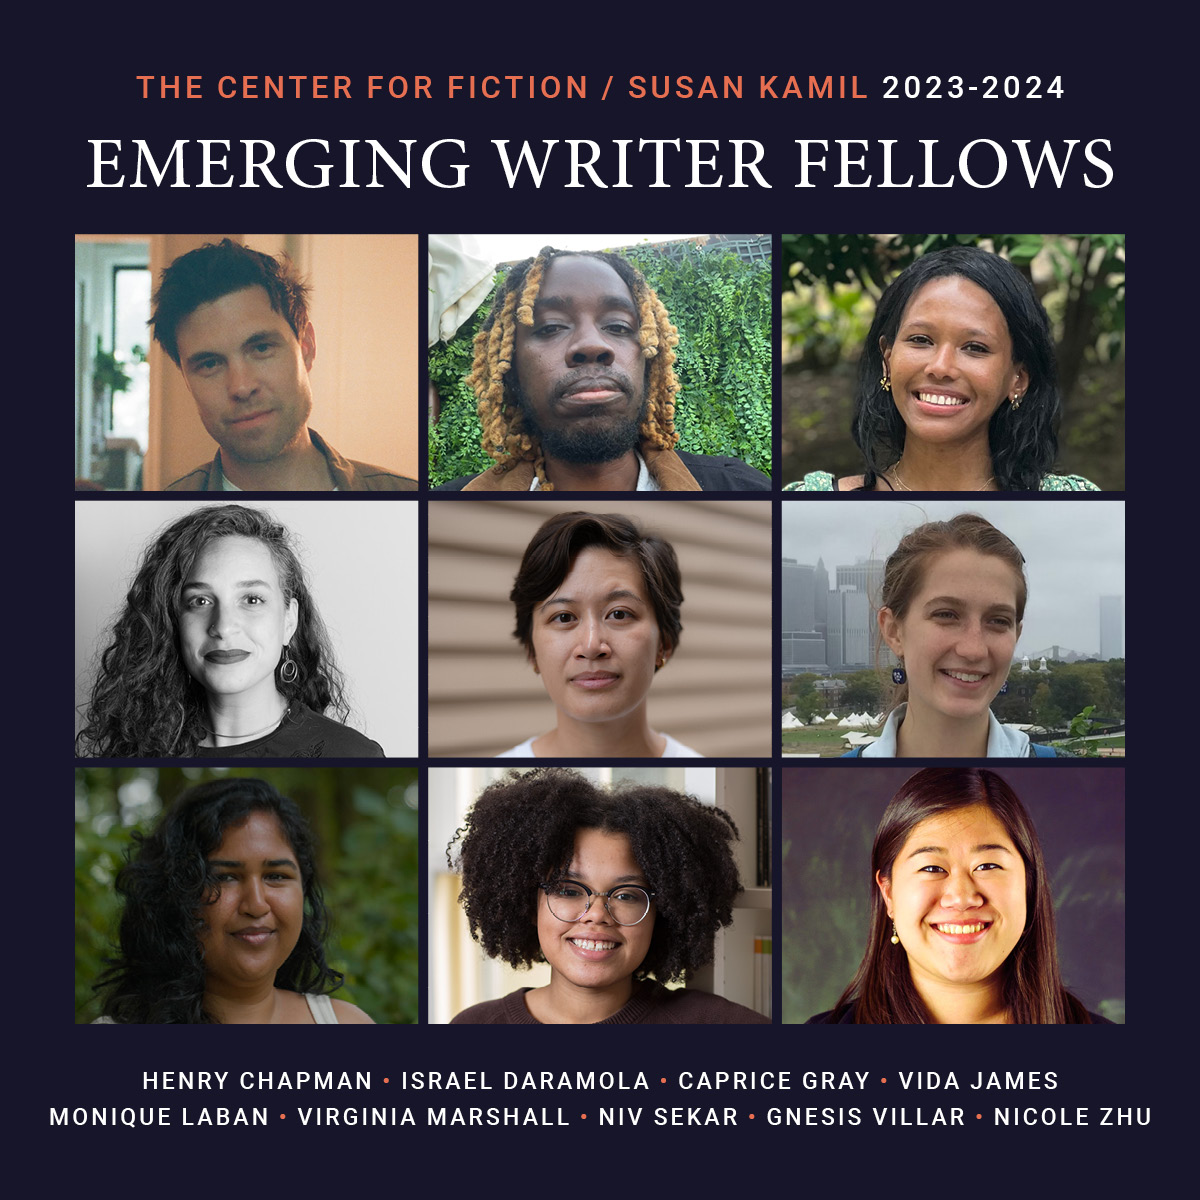 incredibly excited and honored to be in the next cohort of @center4fiction / susan kamil emerging writer fellows! centerforfiction.org/grants-awards/…